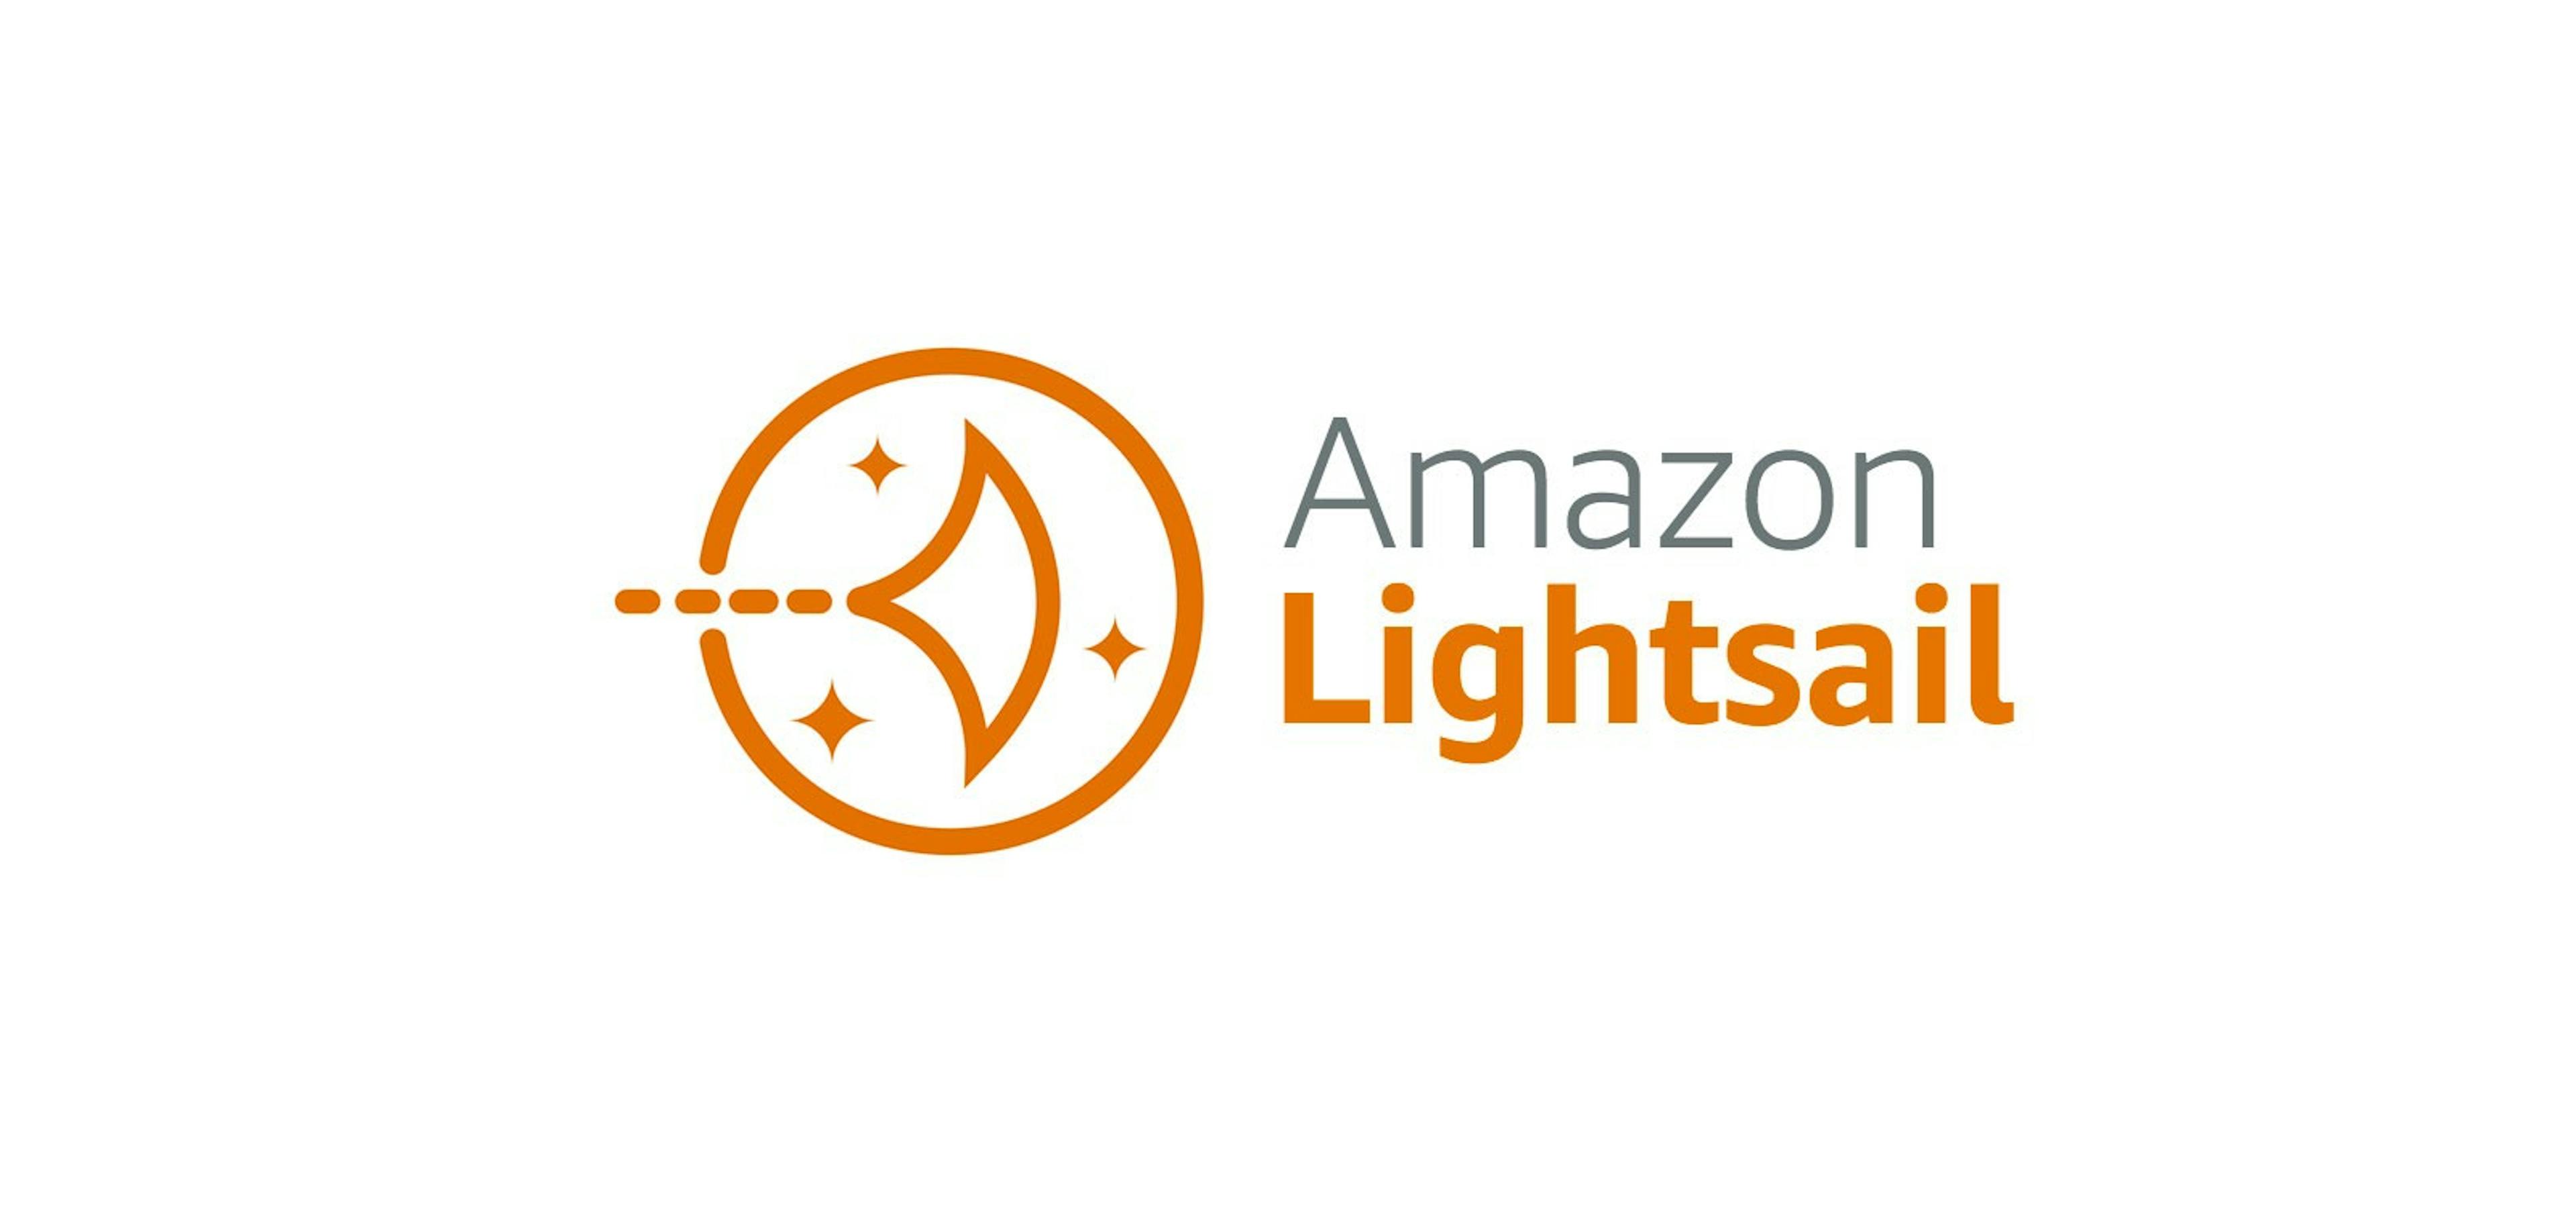 featured image - What is Amazon Lightsail?